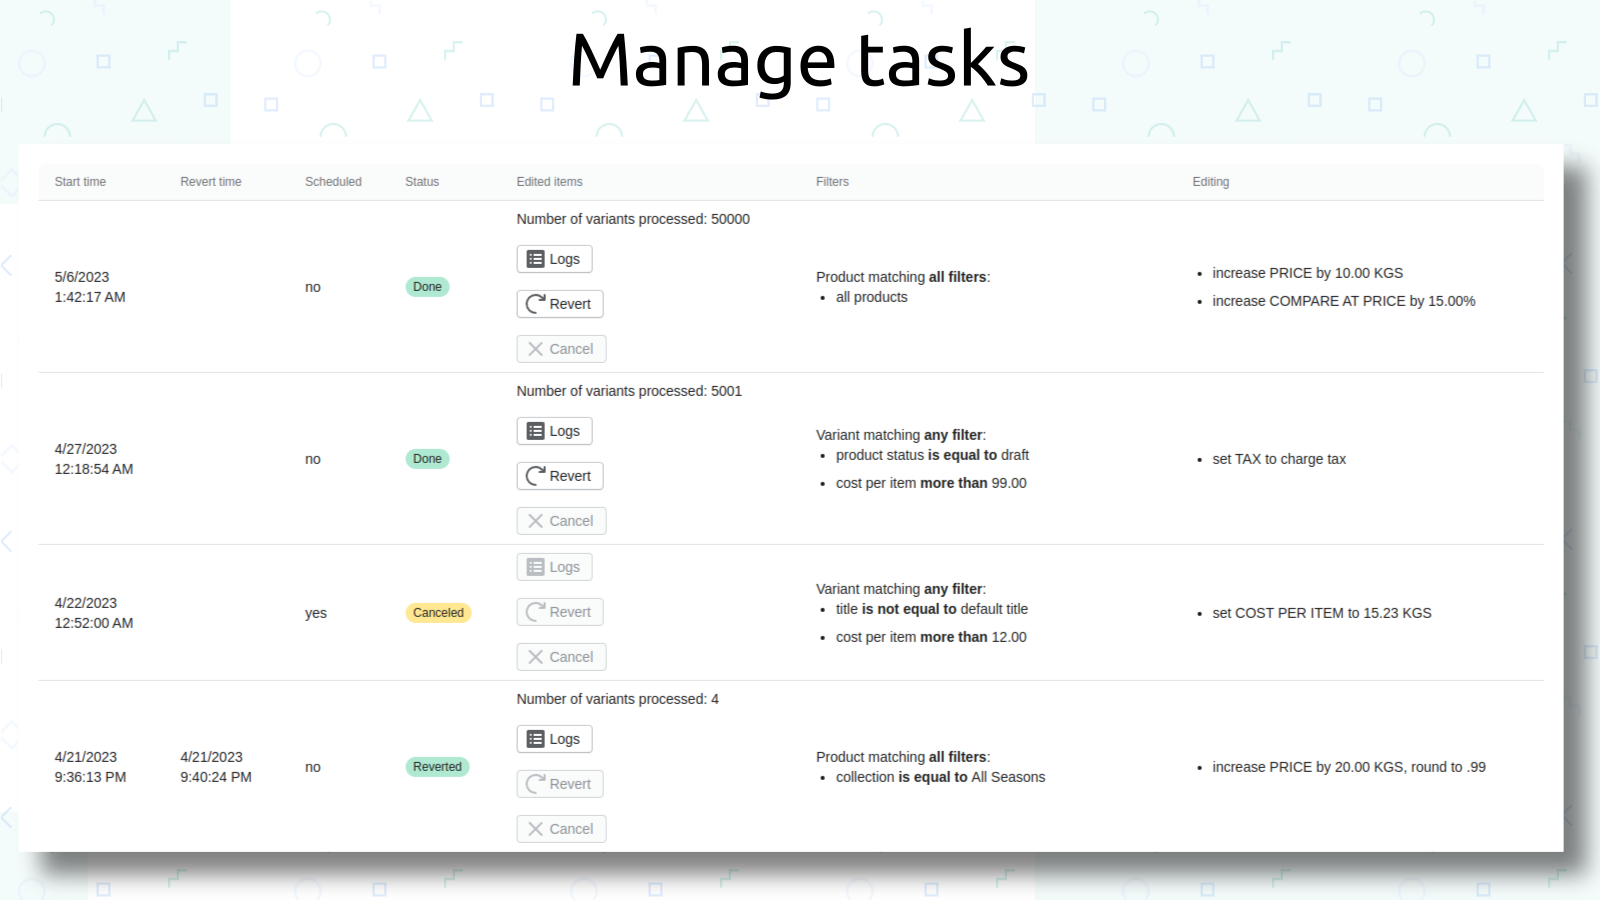 Price manager by tasks